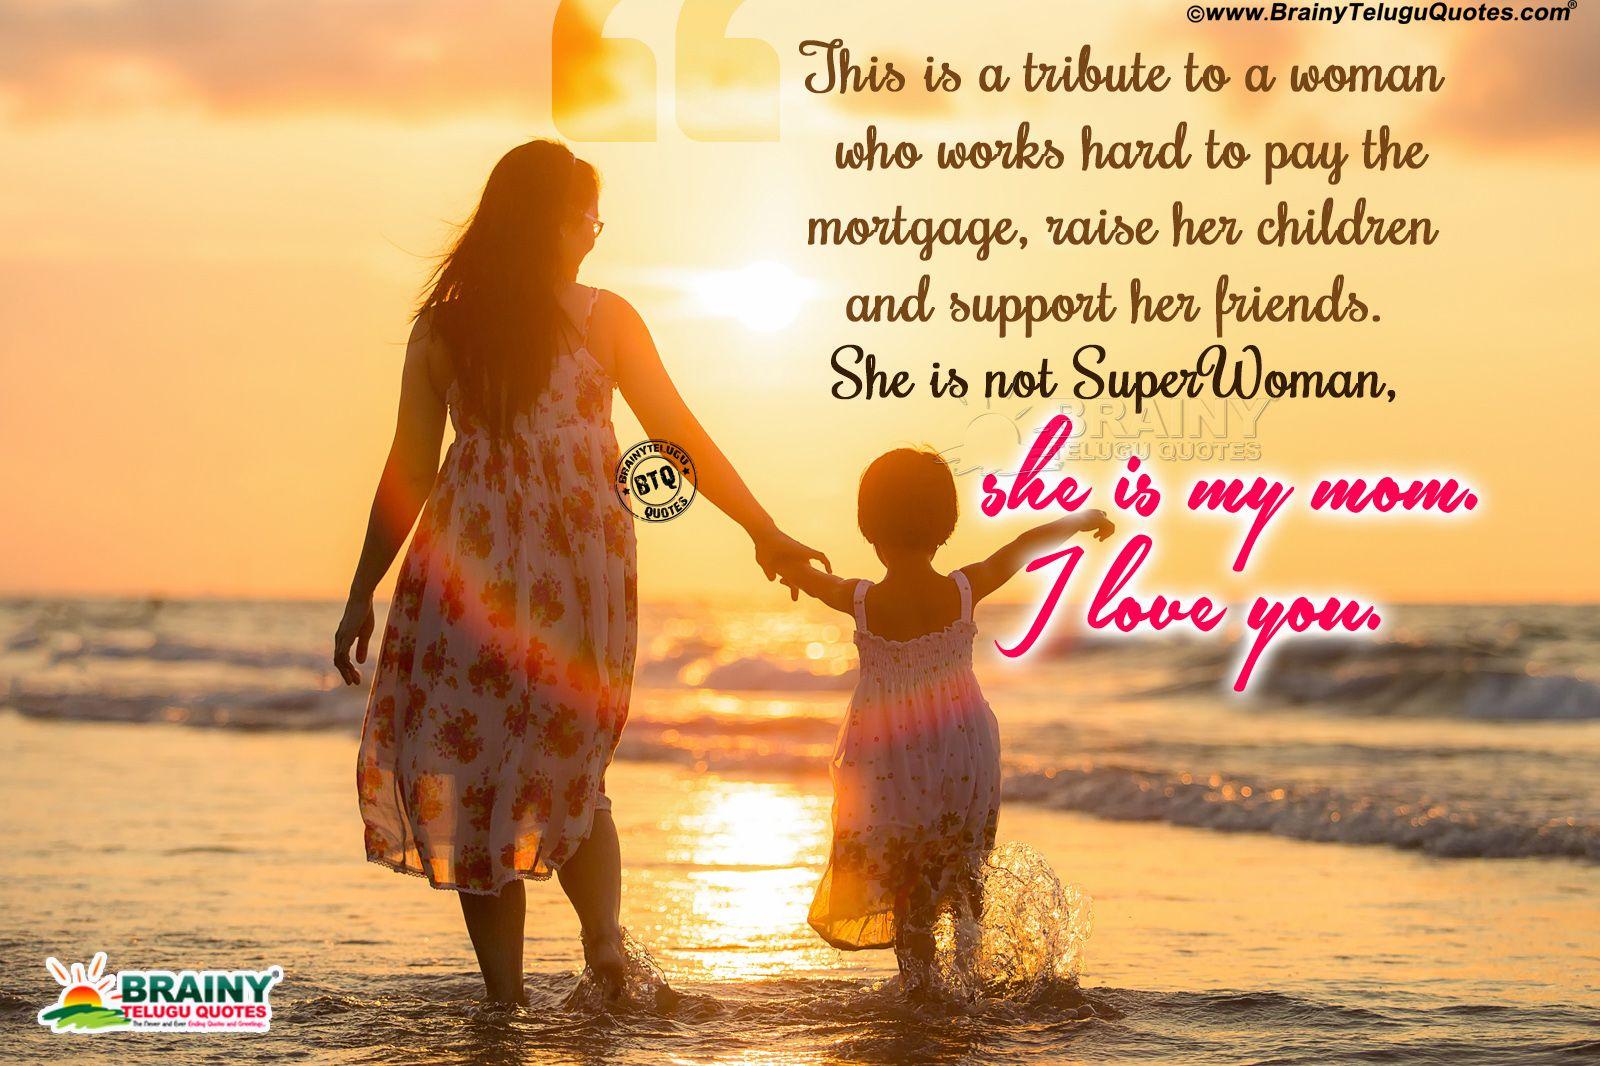 Daughter mothers перевод. In English mother. Quotes about mother. Aphorisms about mother. Heart touching quote about Happiness in English.